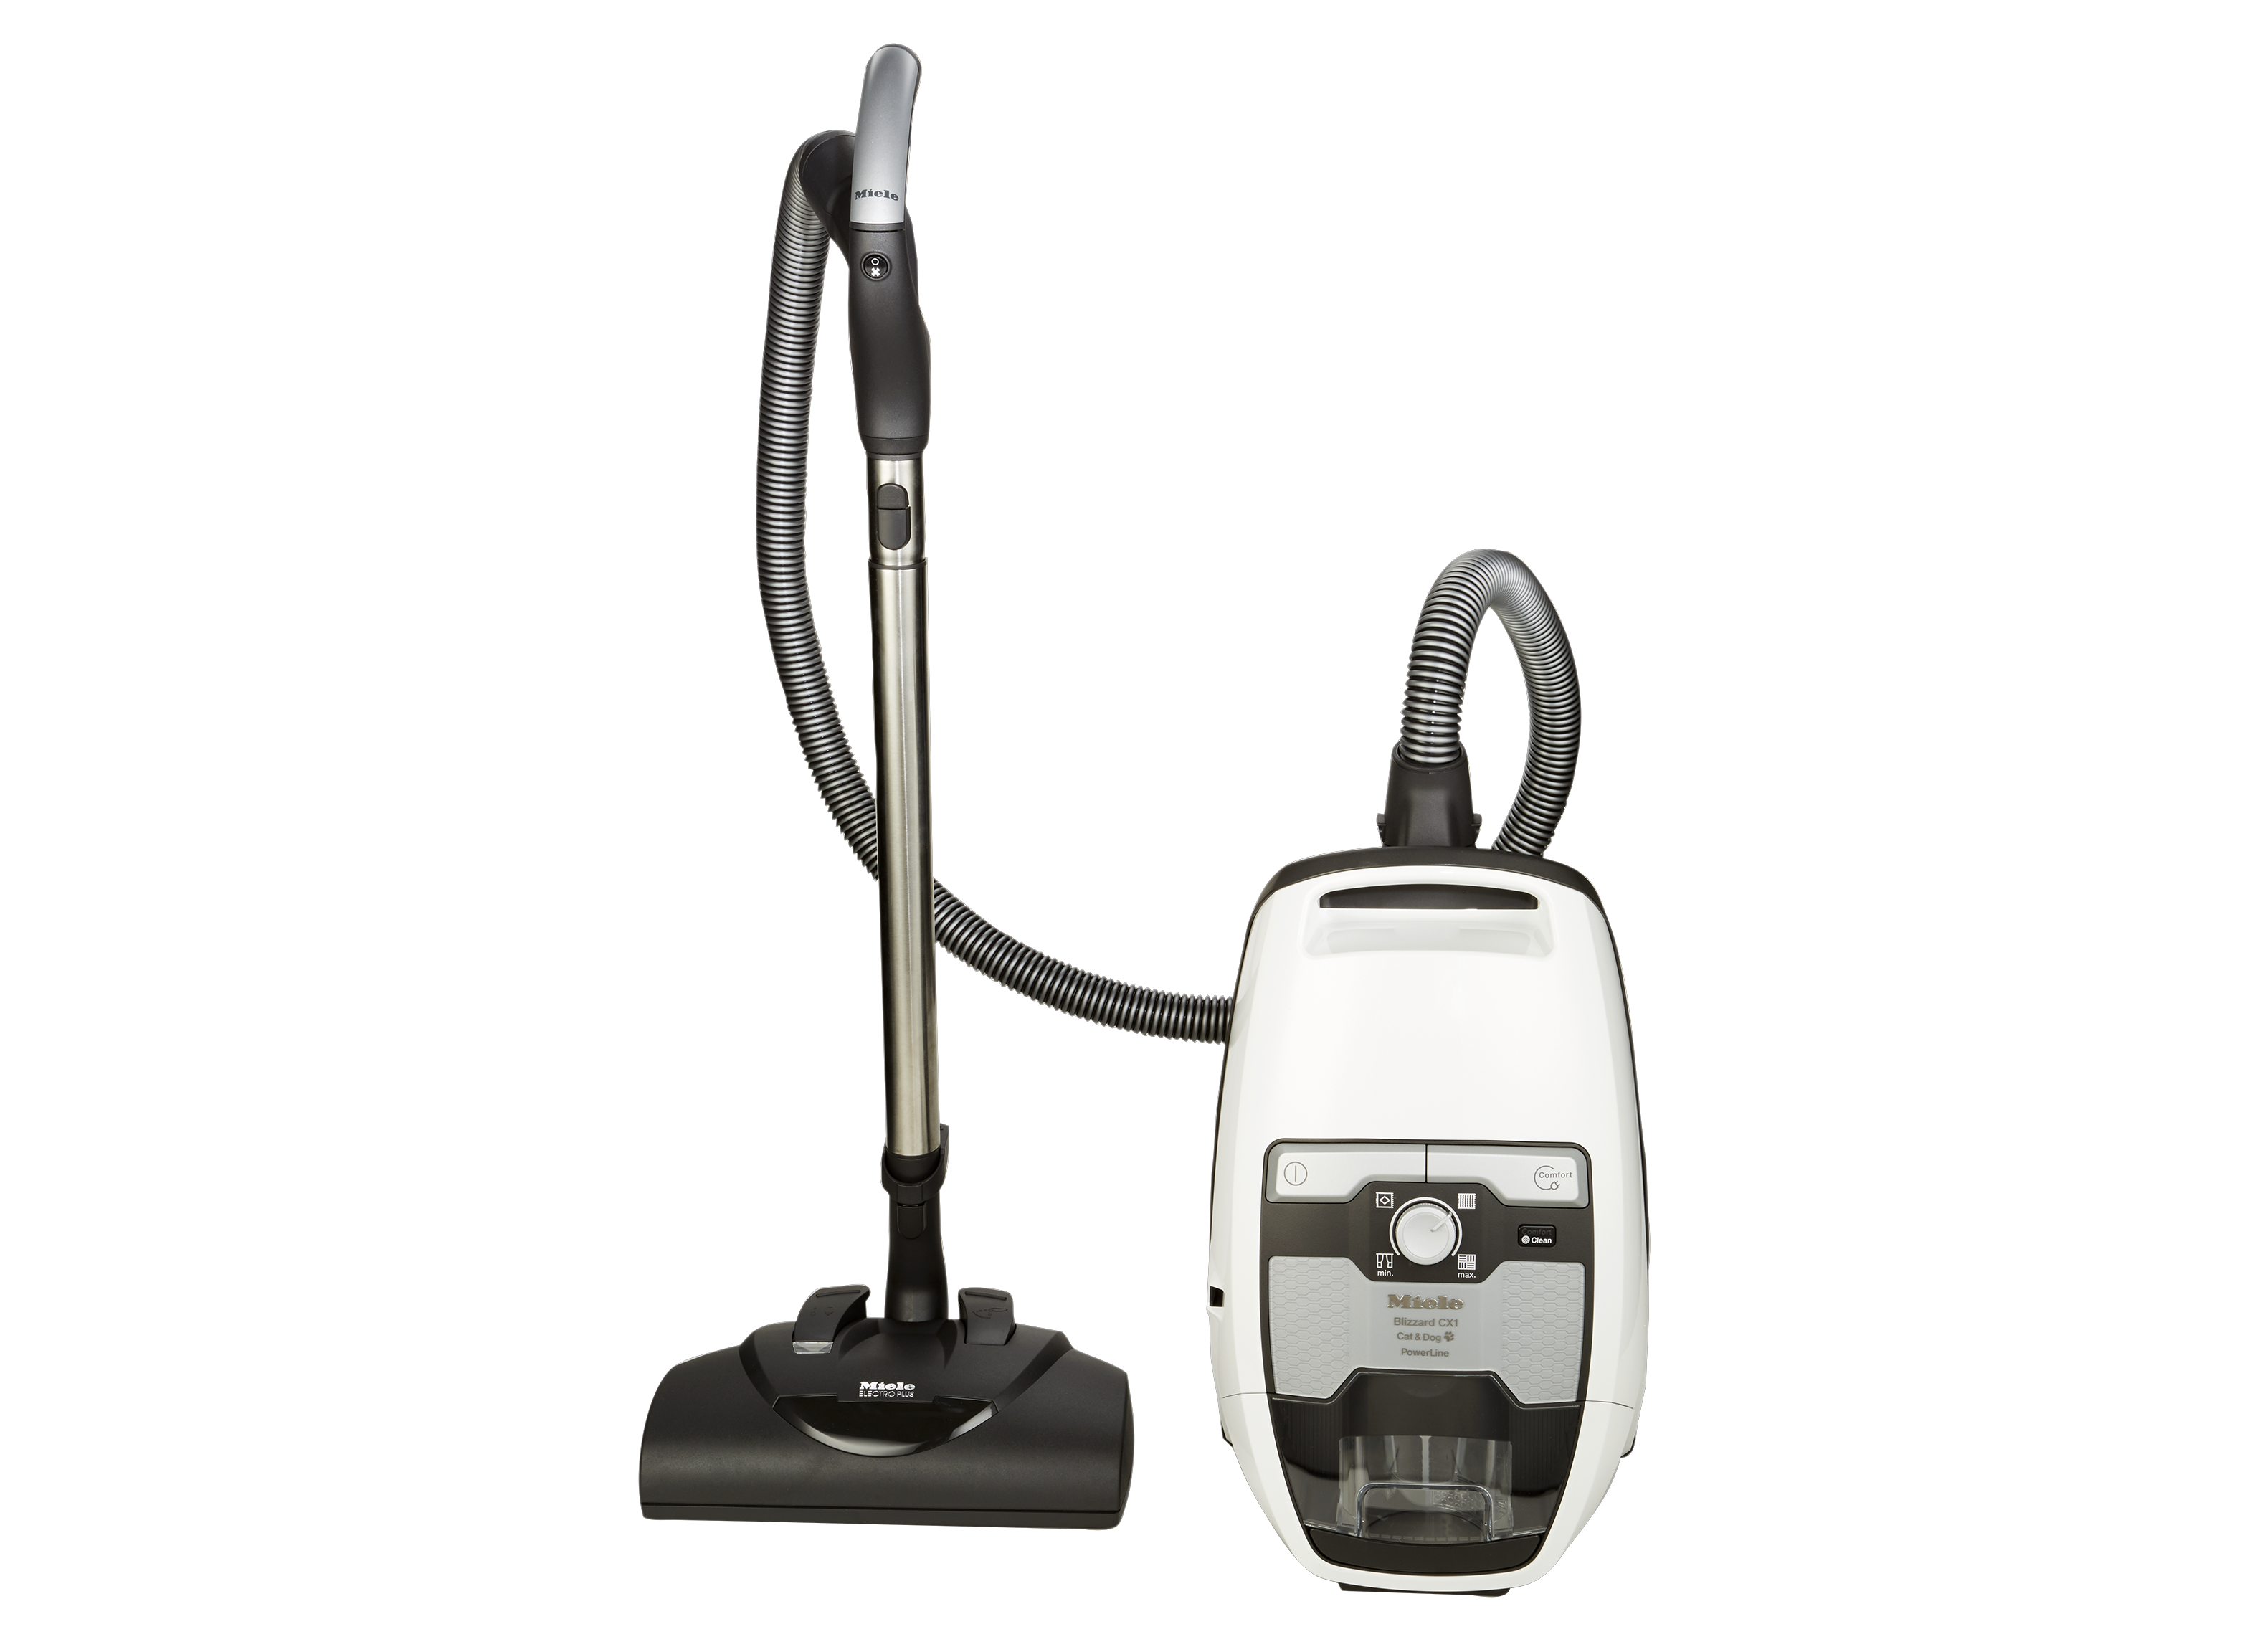 cruise betekenis Gemengd Miele Blizzard CX1 Cat & Dog Vacuum Cleaner Review - Consumer Reports